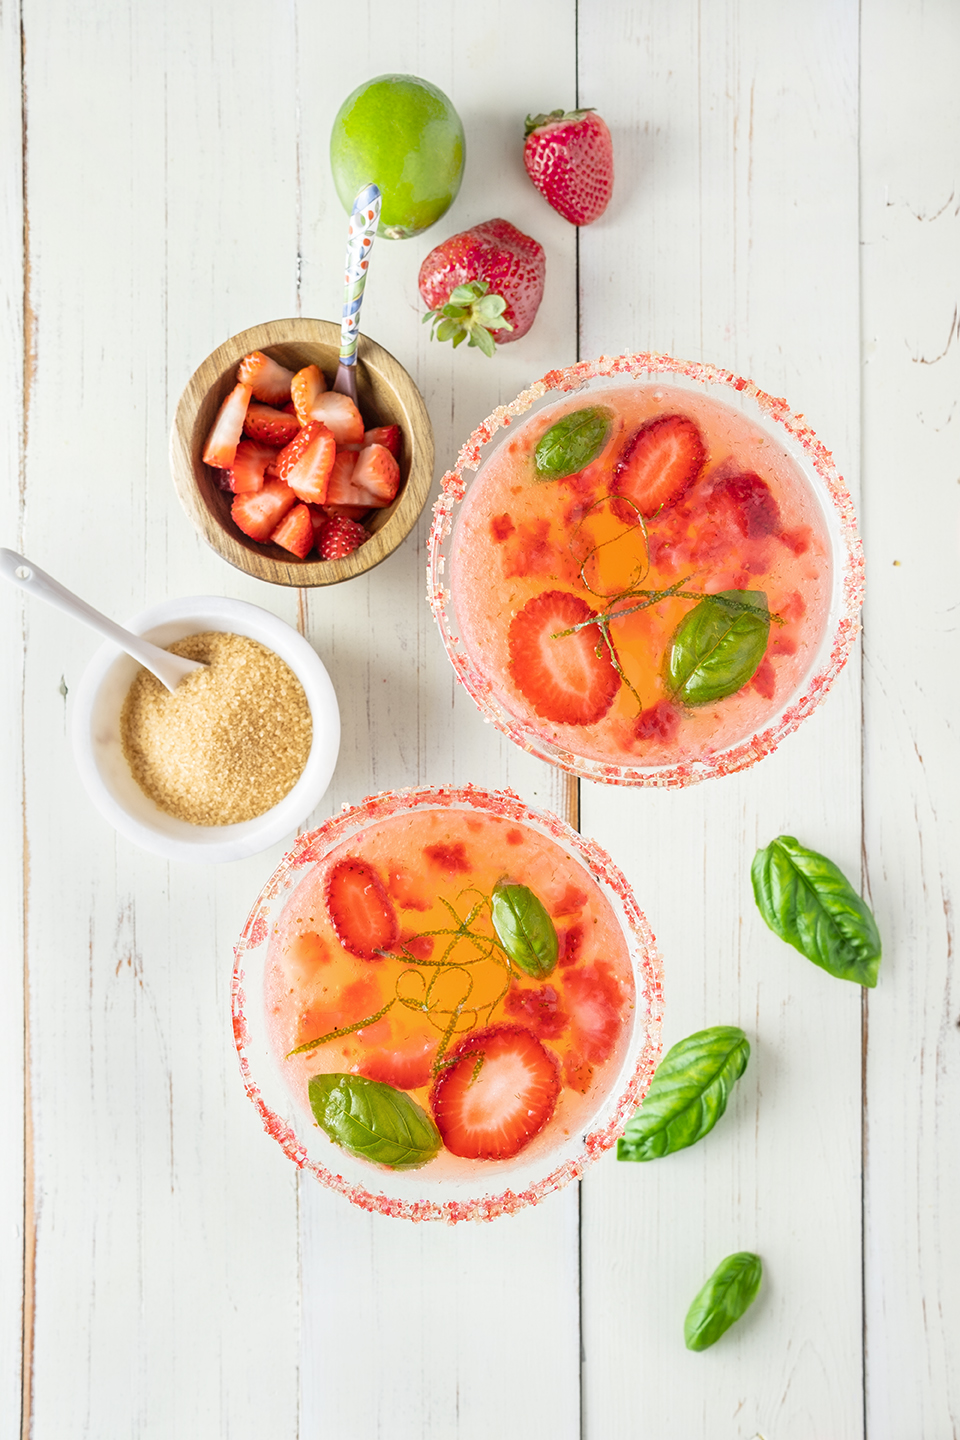  Two martini glasses filled with Strawberry Basil cocktail with sliced strawberries, basil leaves and lime zest.  Raw sugar, chopped strawberries in bowls on a rustic white wood background.  